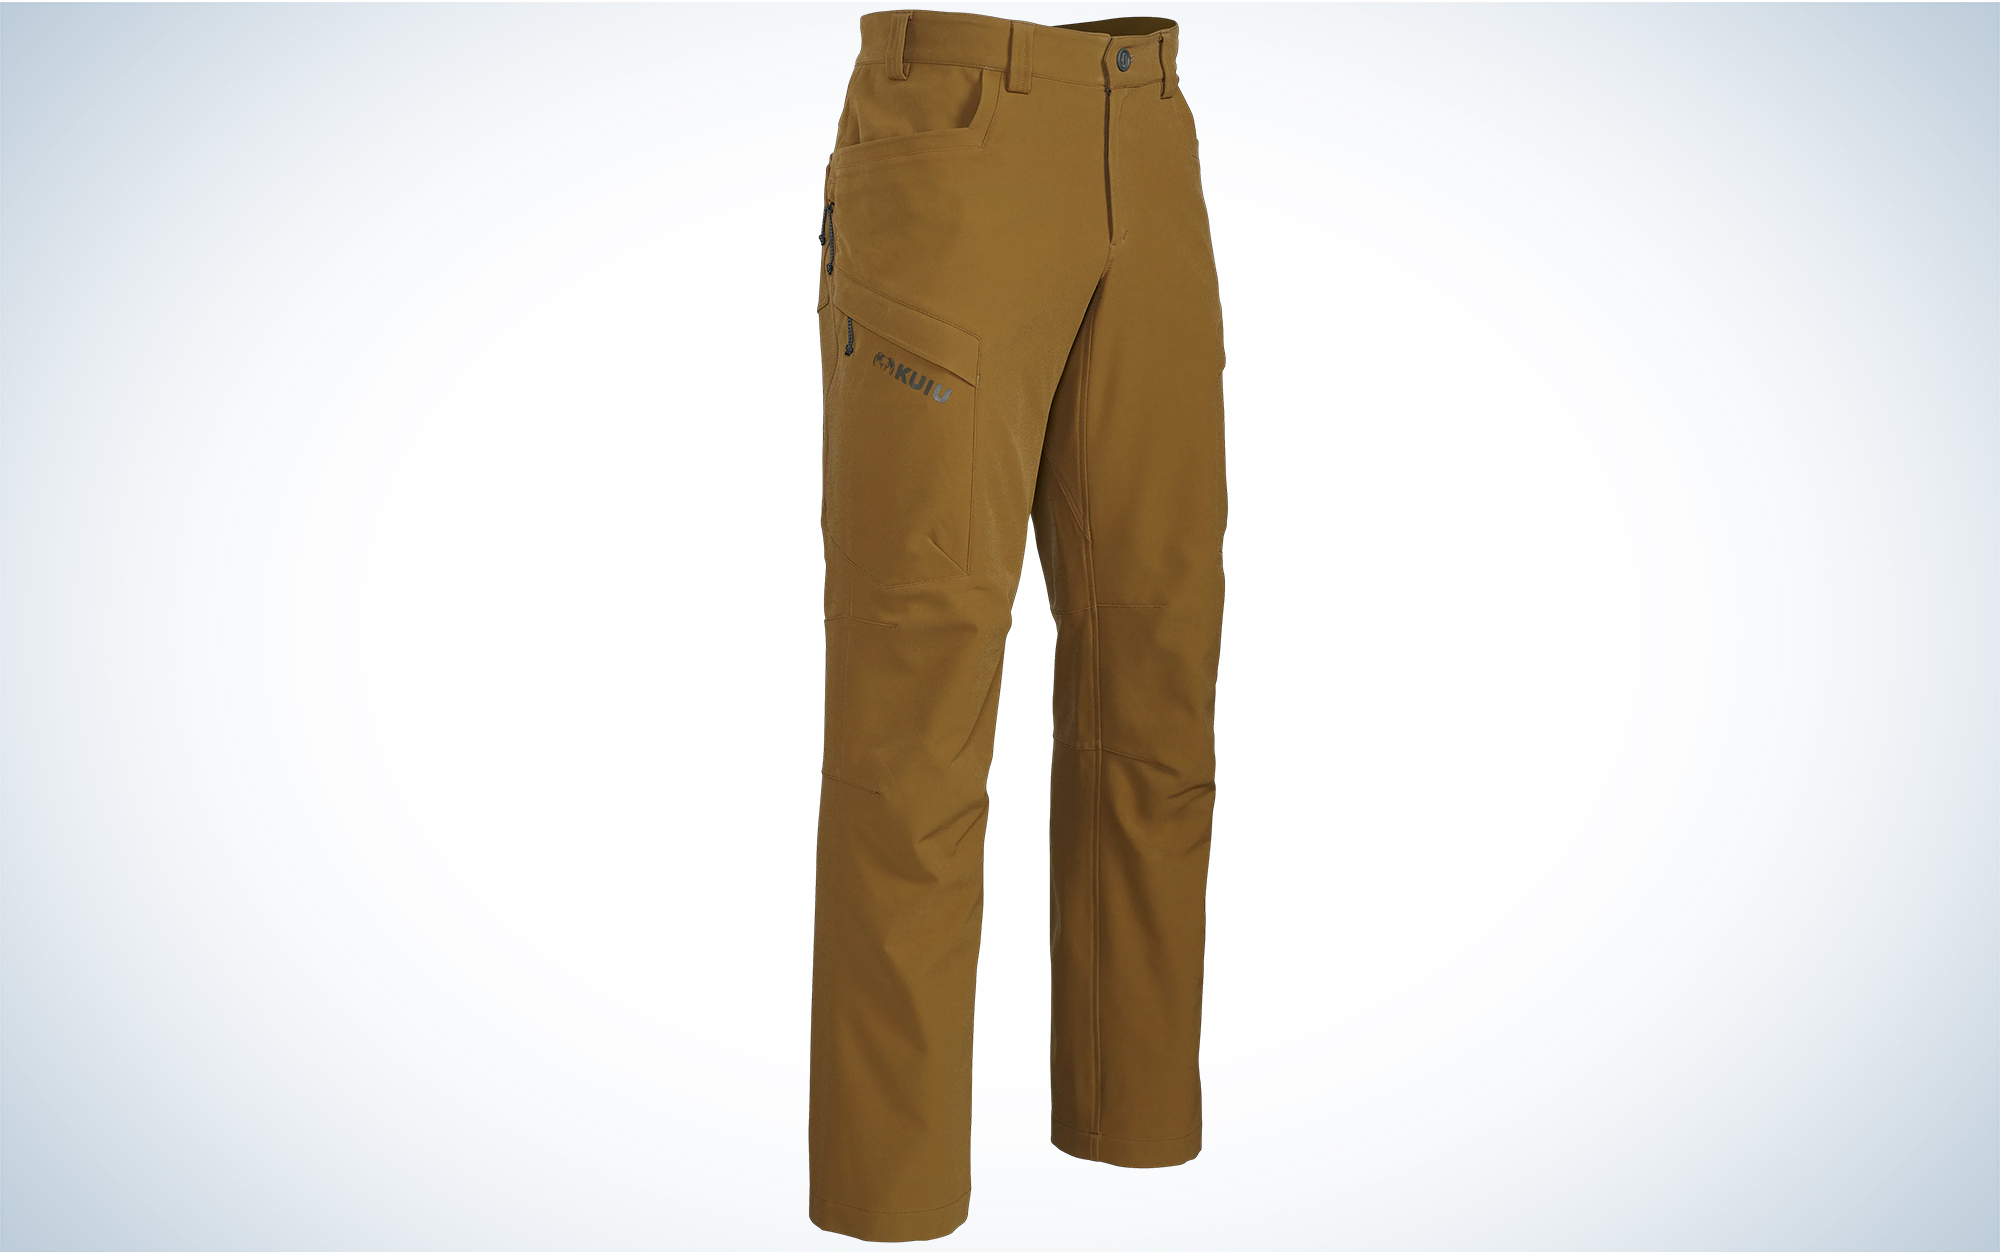 The Kuiu Attack Pants are the best hiking pants for bushwhacking.